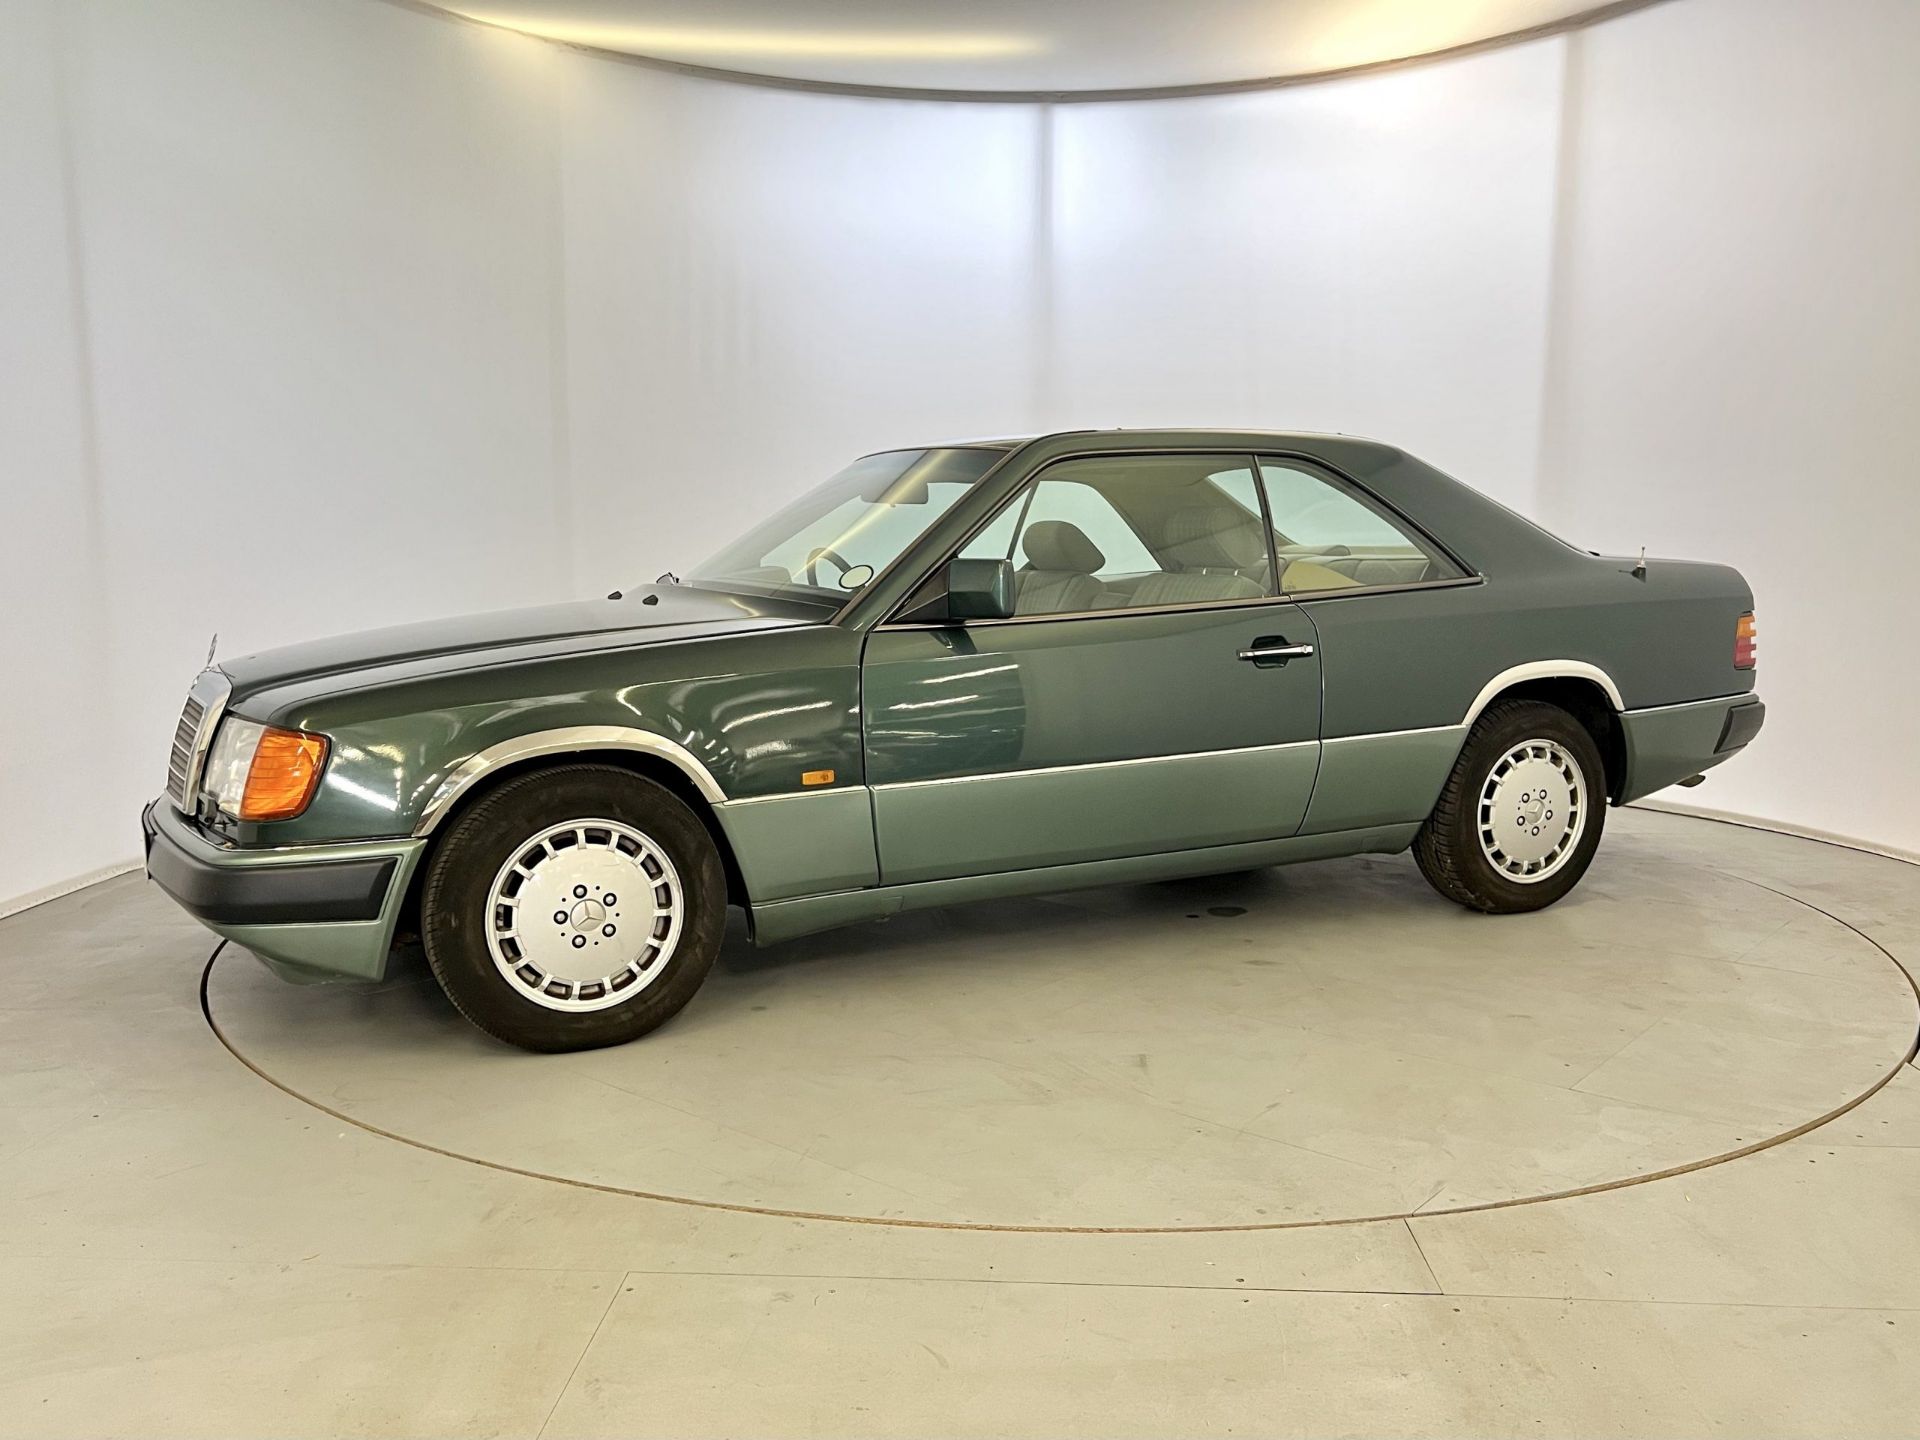 Mercedes 300CE - Image 4 of 30